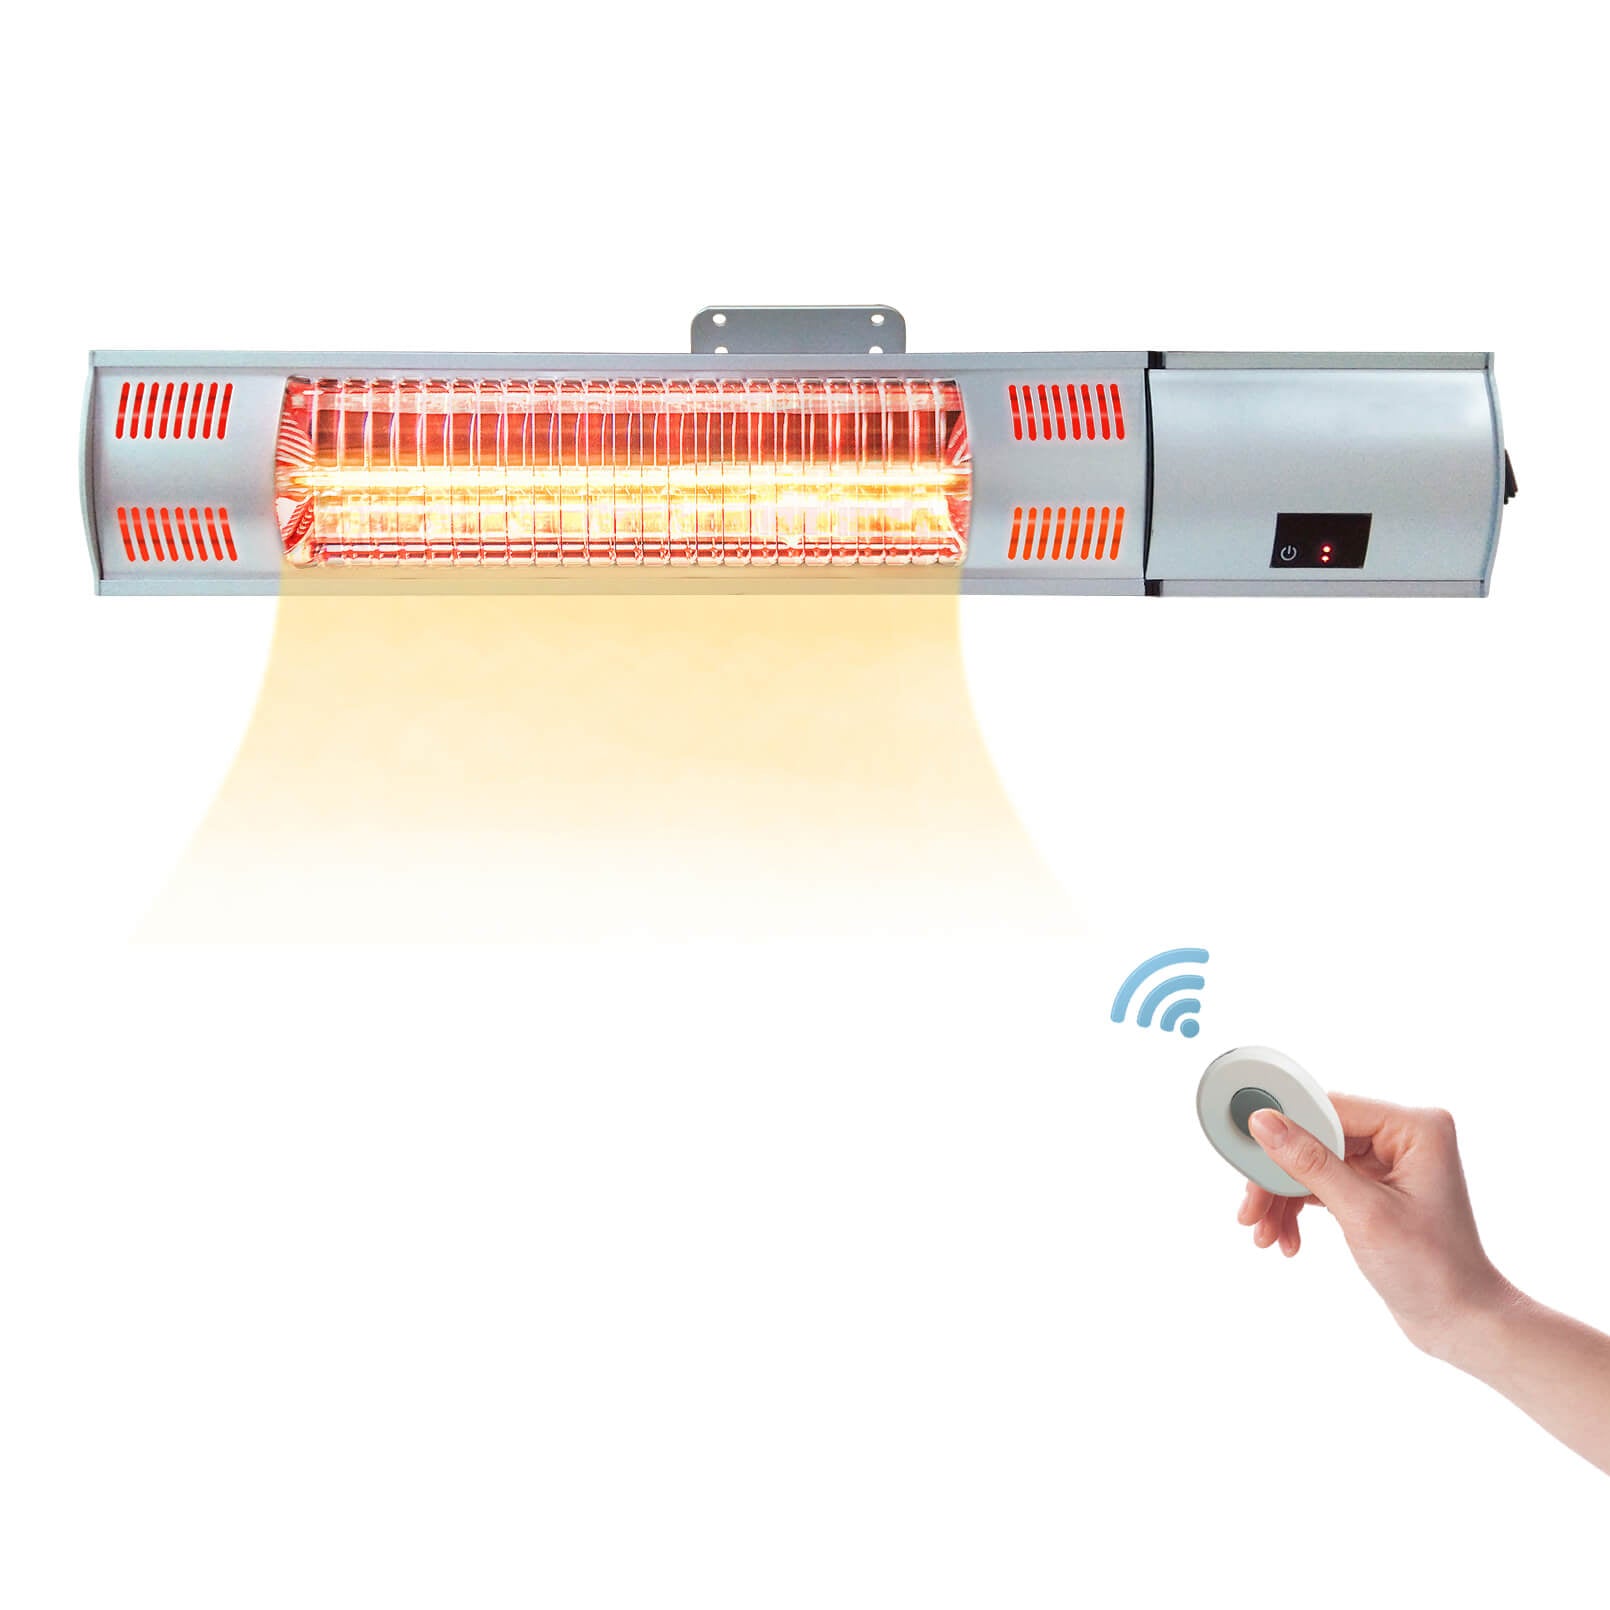 Wall Mounted Infrared Electic Patio Heater / Home Space Heater / Infrared Radiant Heater(US pre-sale, Shipping at the end of September)